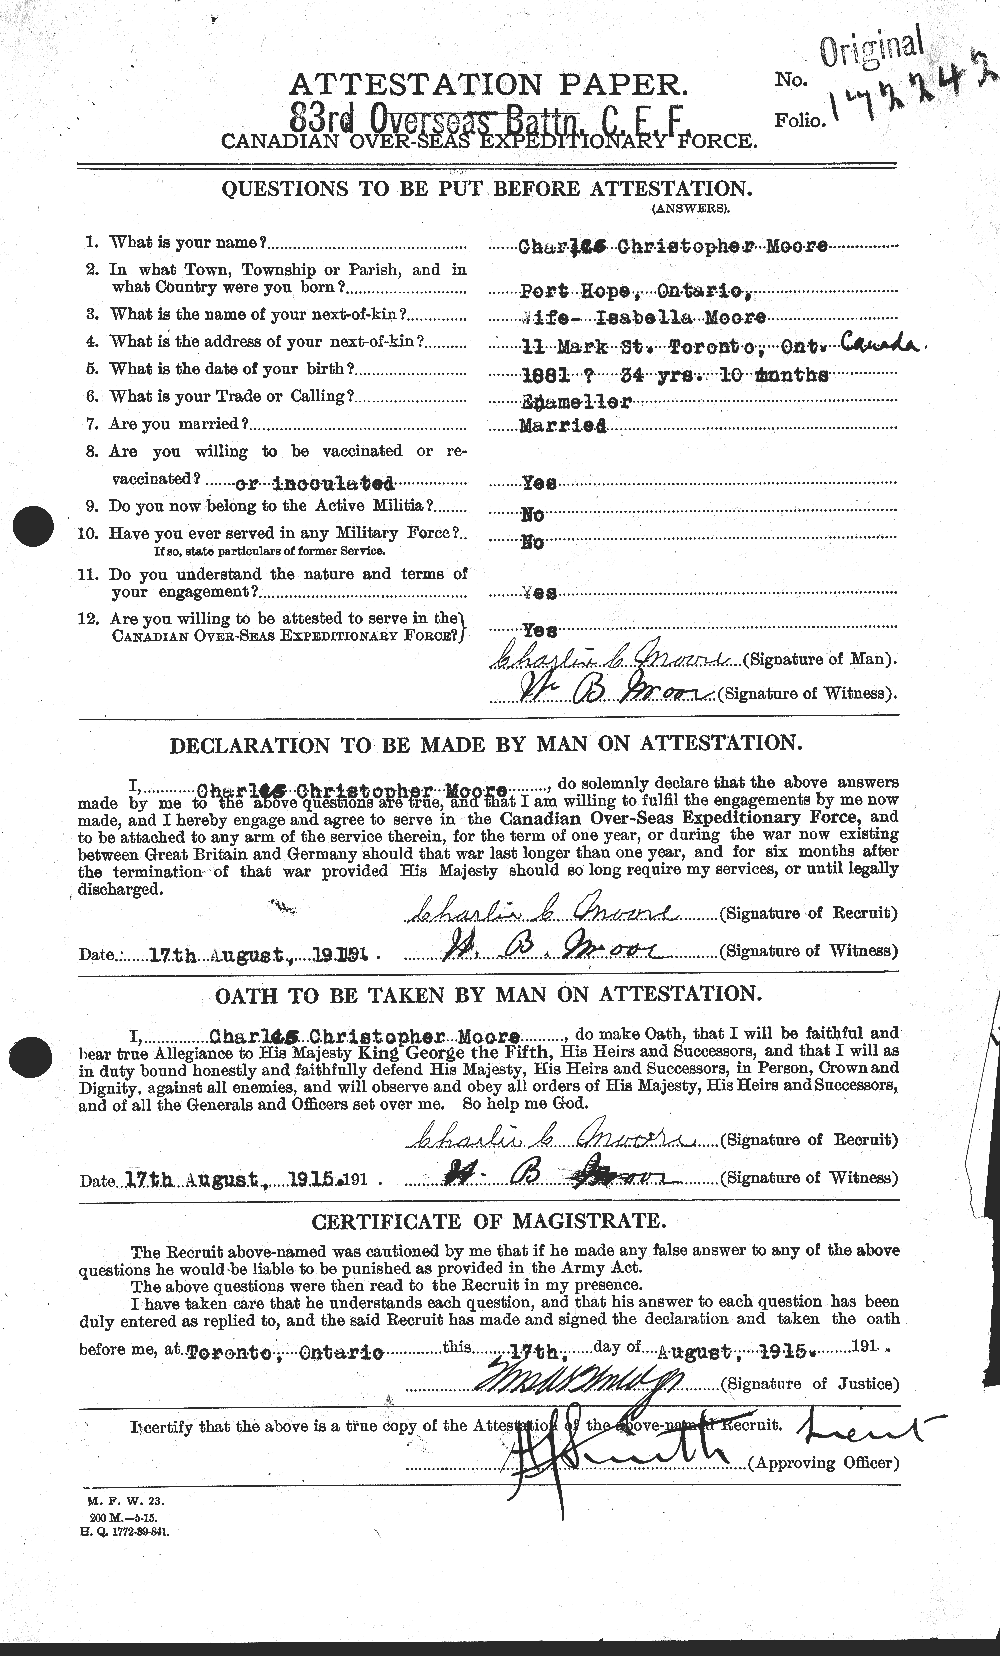 Personnel Records of the First World War - CEF 506498a